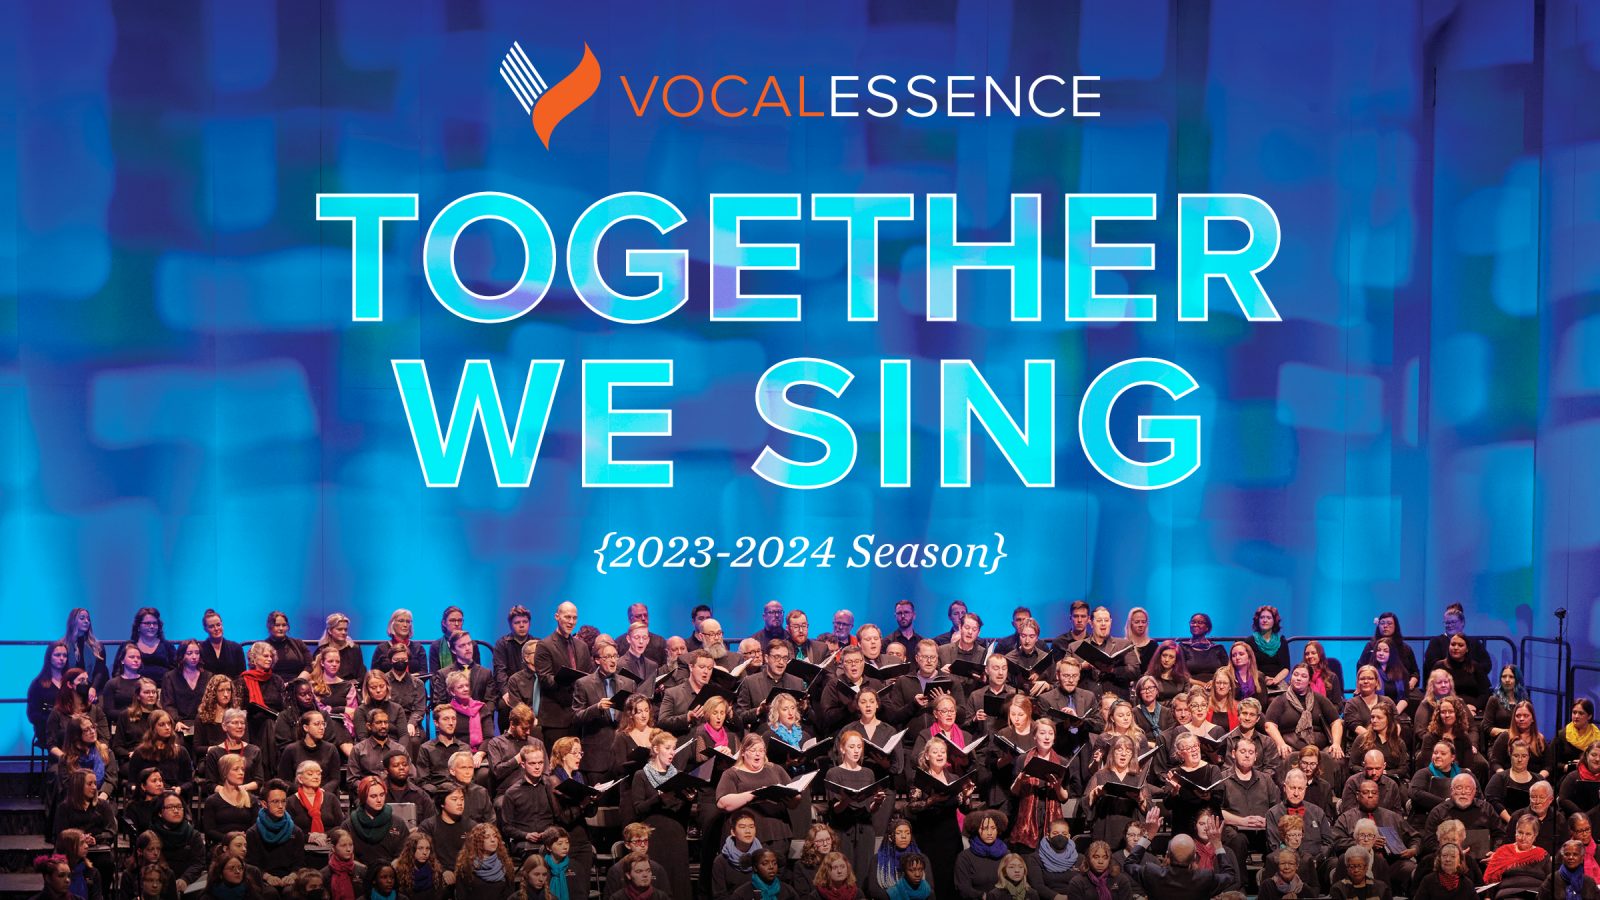 VocalEssence logo, Together We Sing, 2023-2024 Season, with singers holding black folders performing at Northrop. Design: Lora Joshi, Photo Credit: Tony Nelson Photography